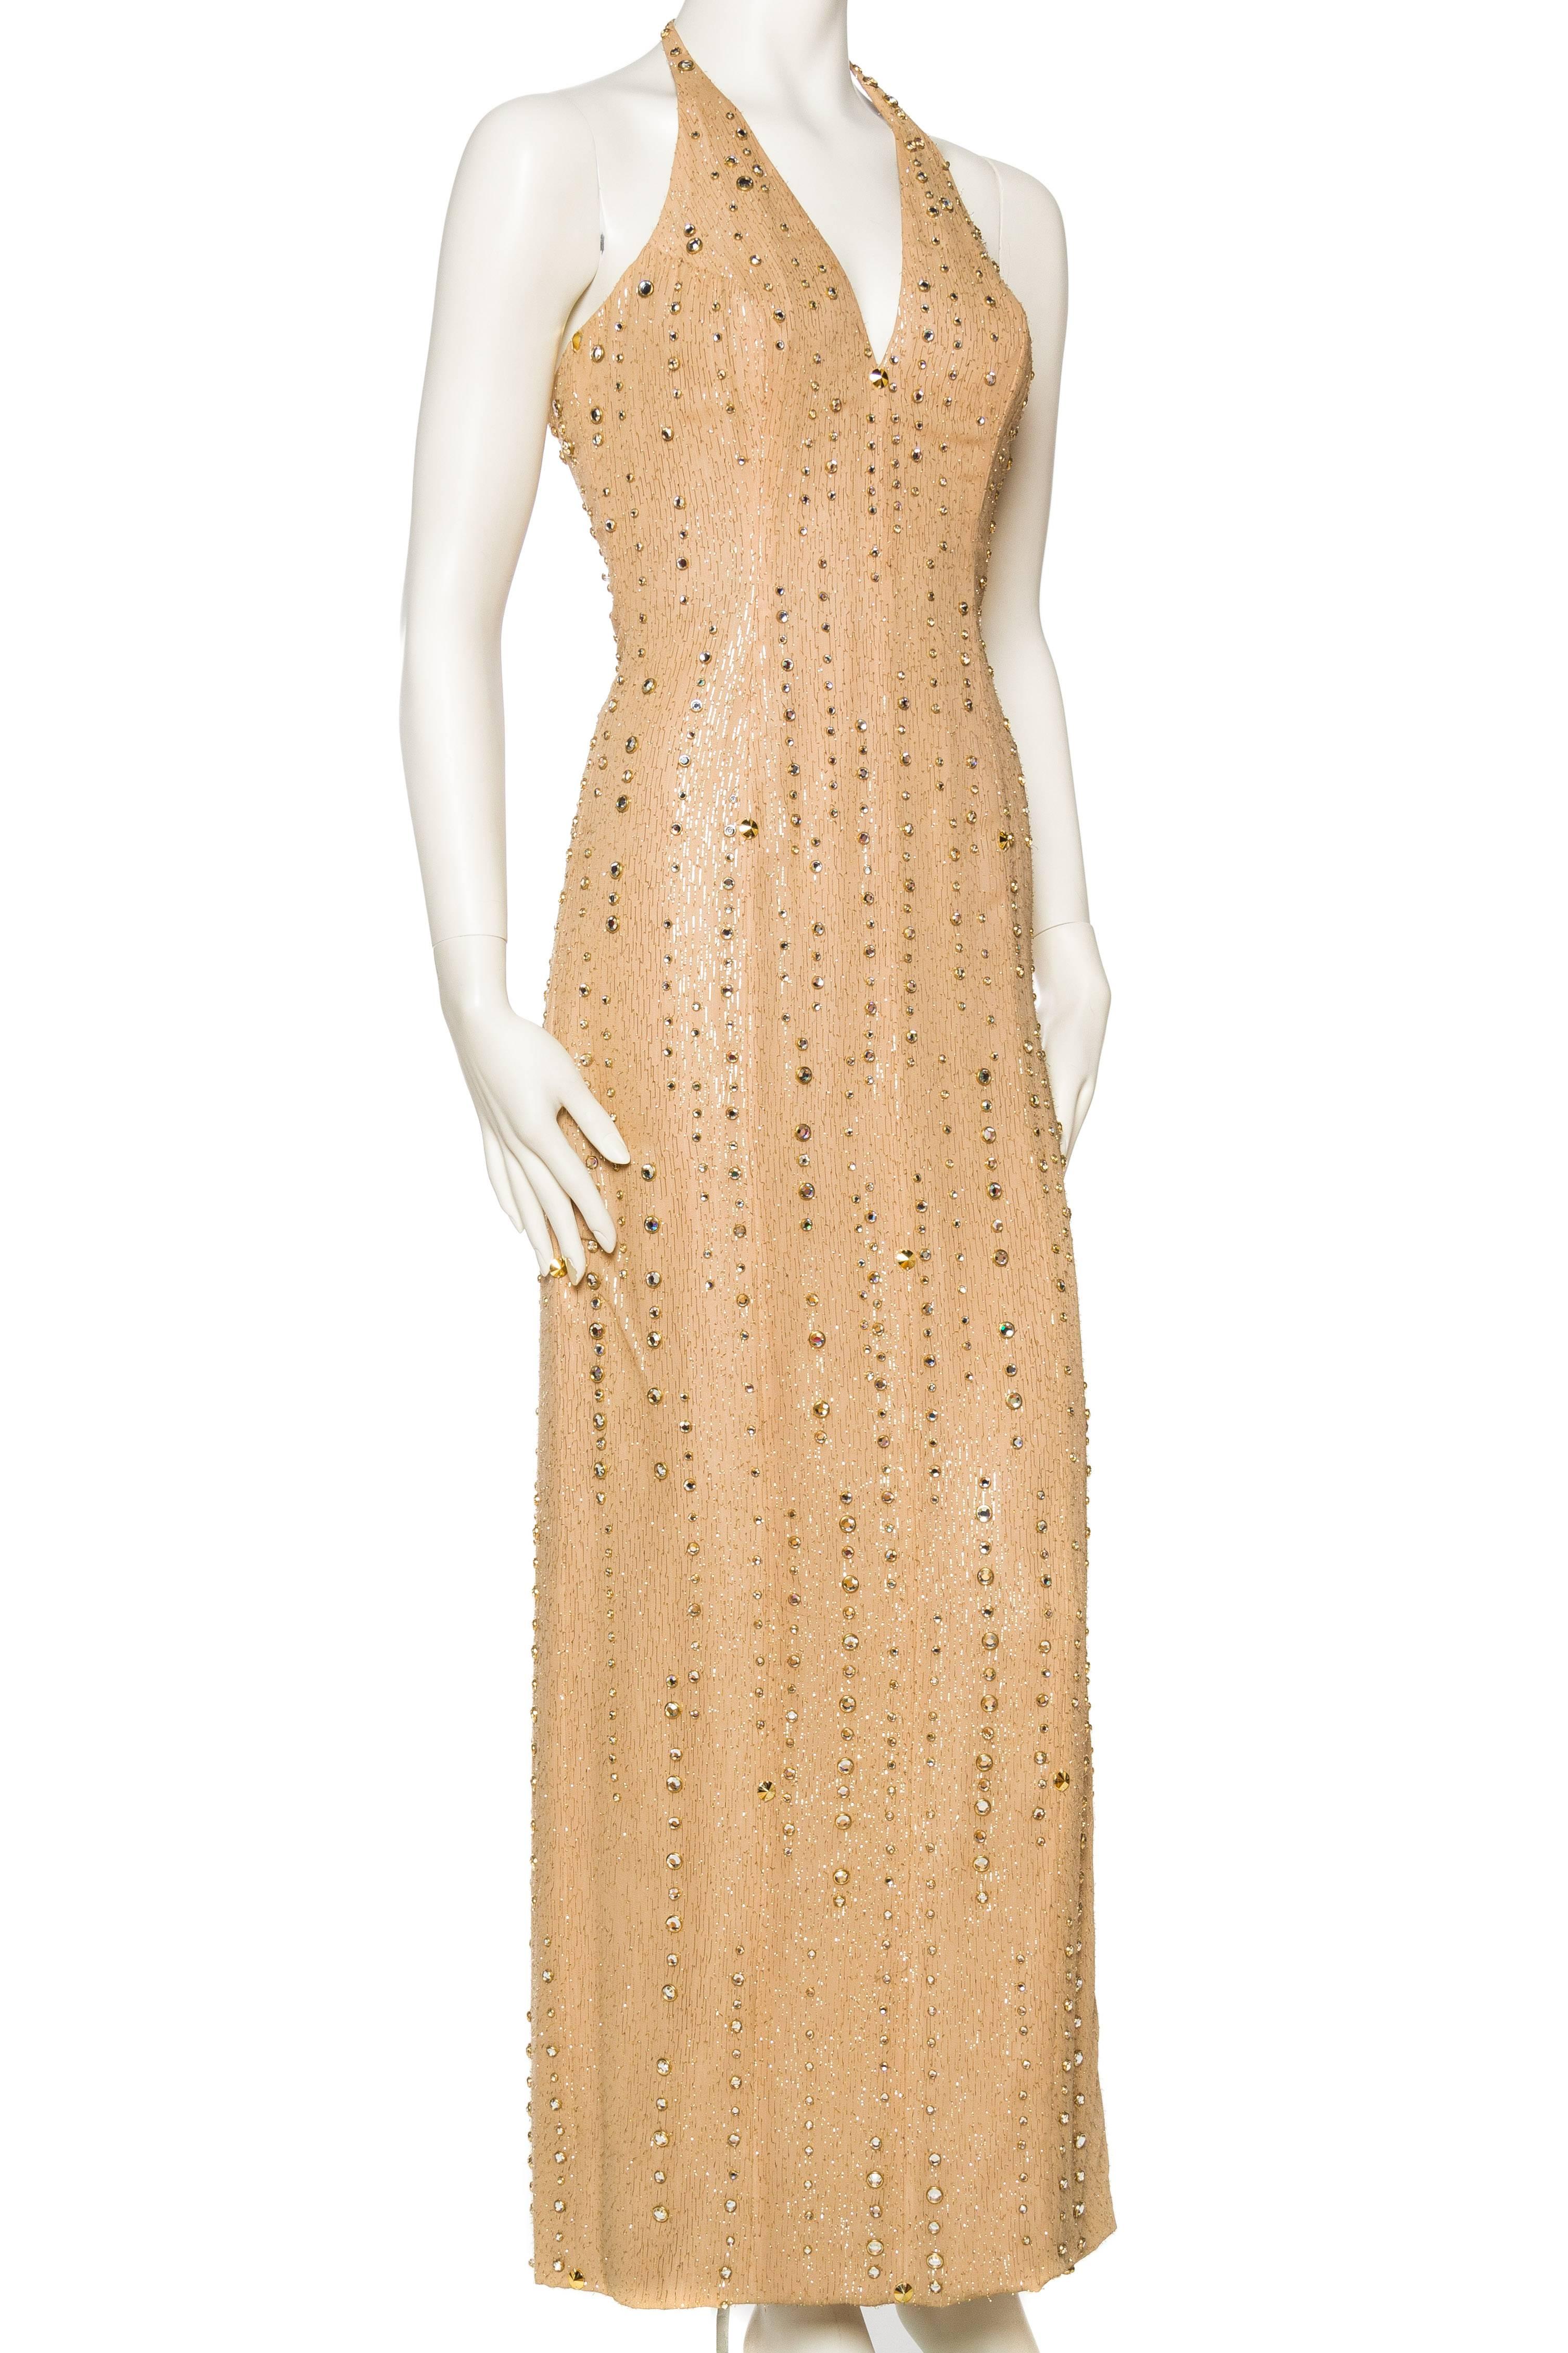 Women's 1970s Nude & Gold Halter Gown with Studs and Crystals